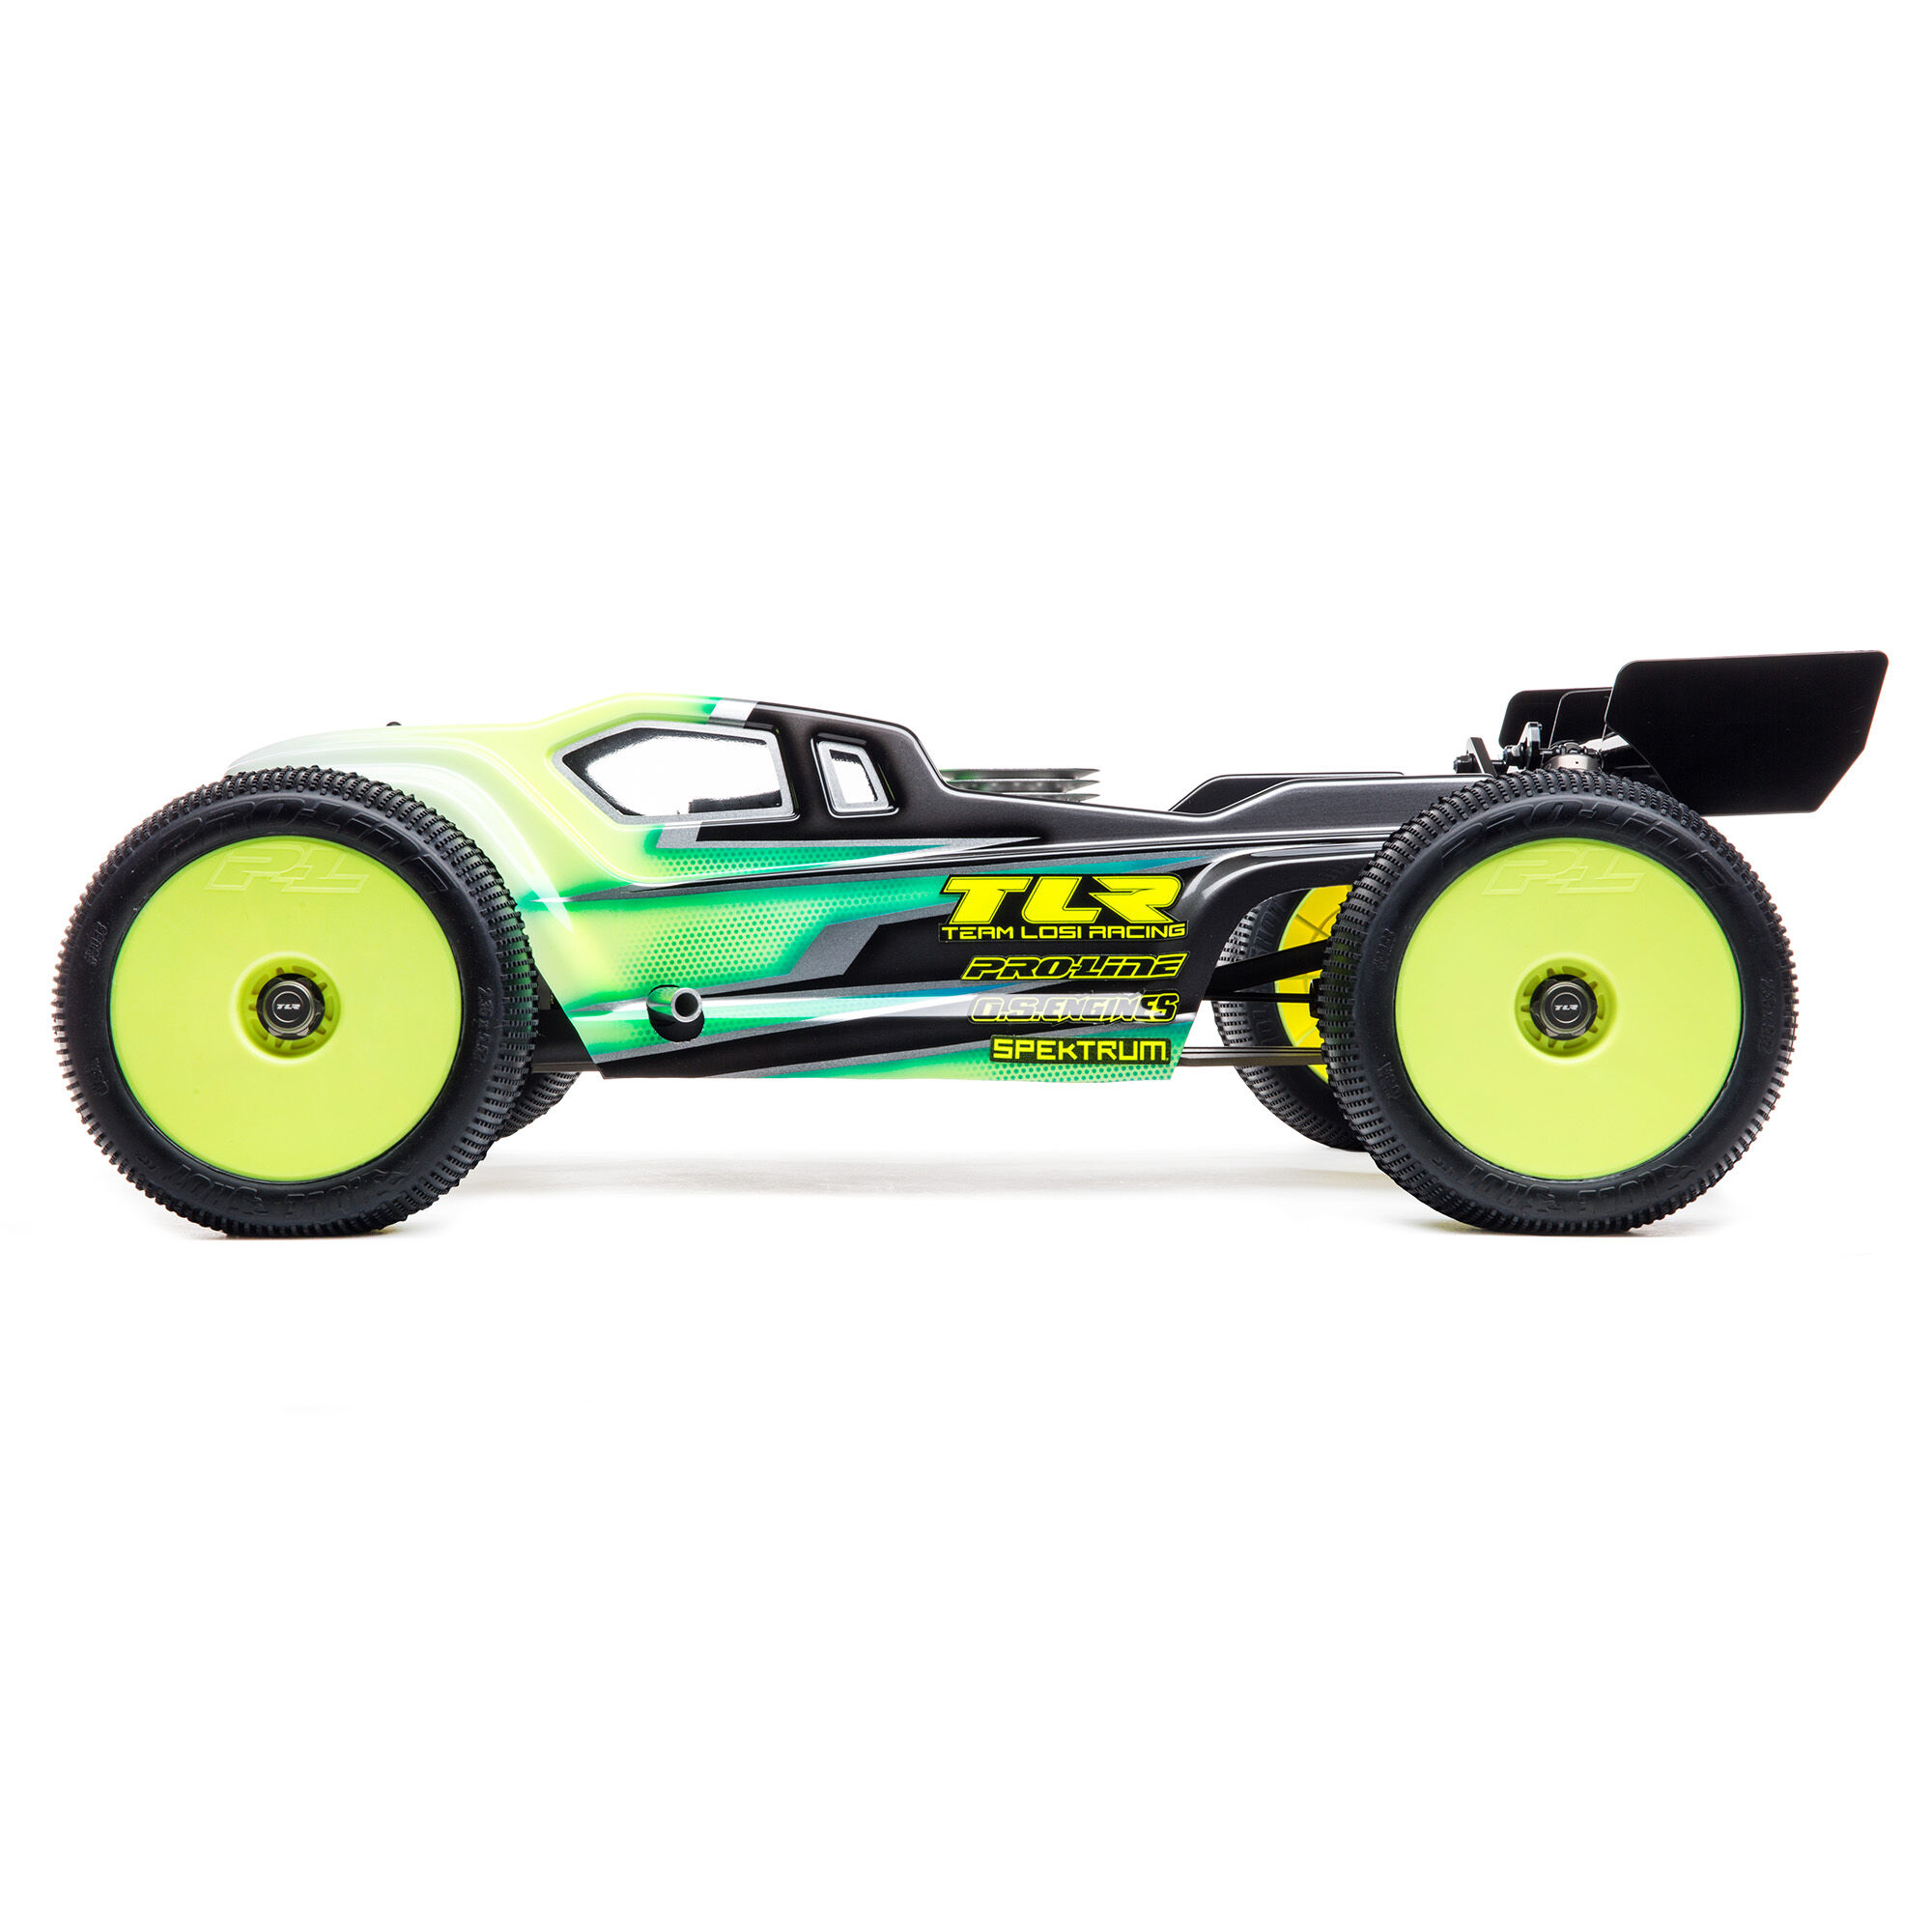 4WD Nitro Elec Truggy No Xte Course Kit TLR04009 Buggy Losi RC Buggy 1:8 8IGHT XT 